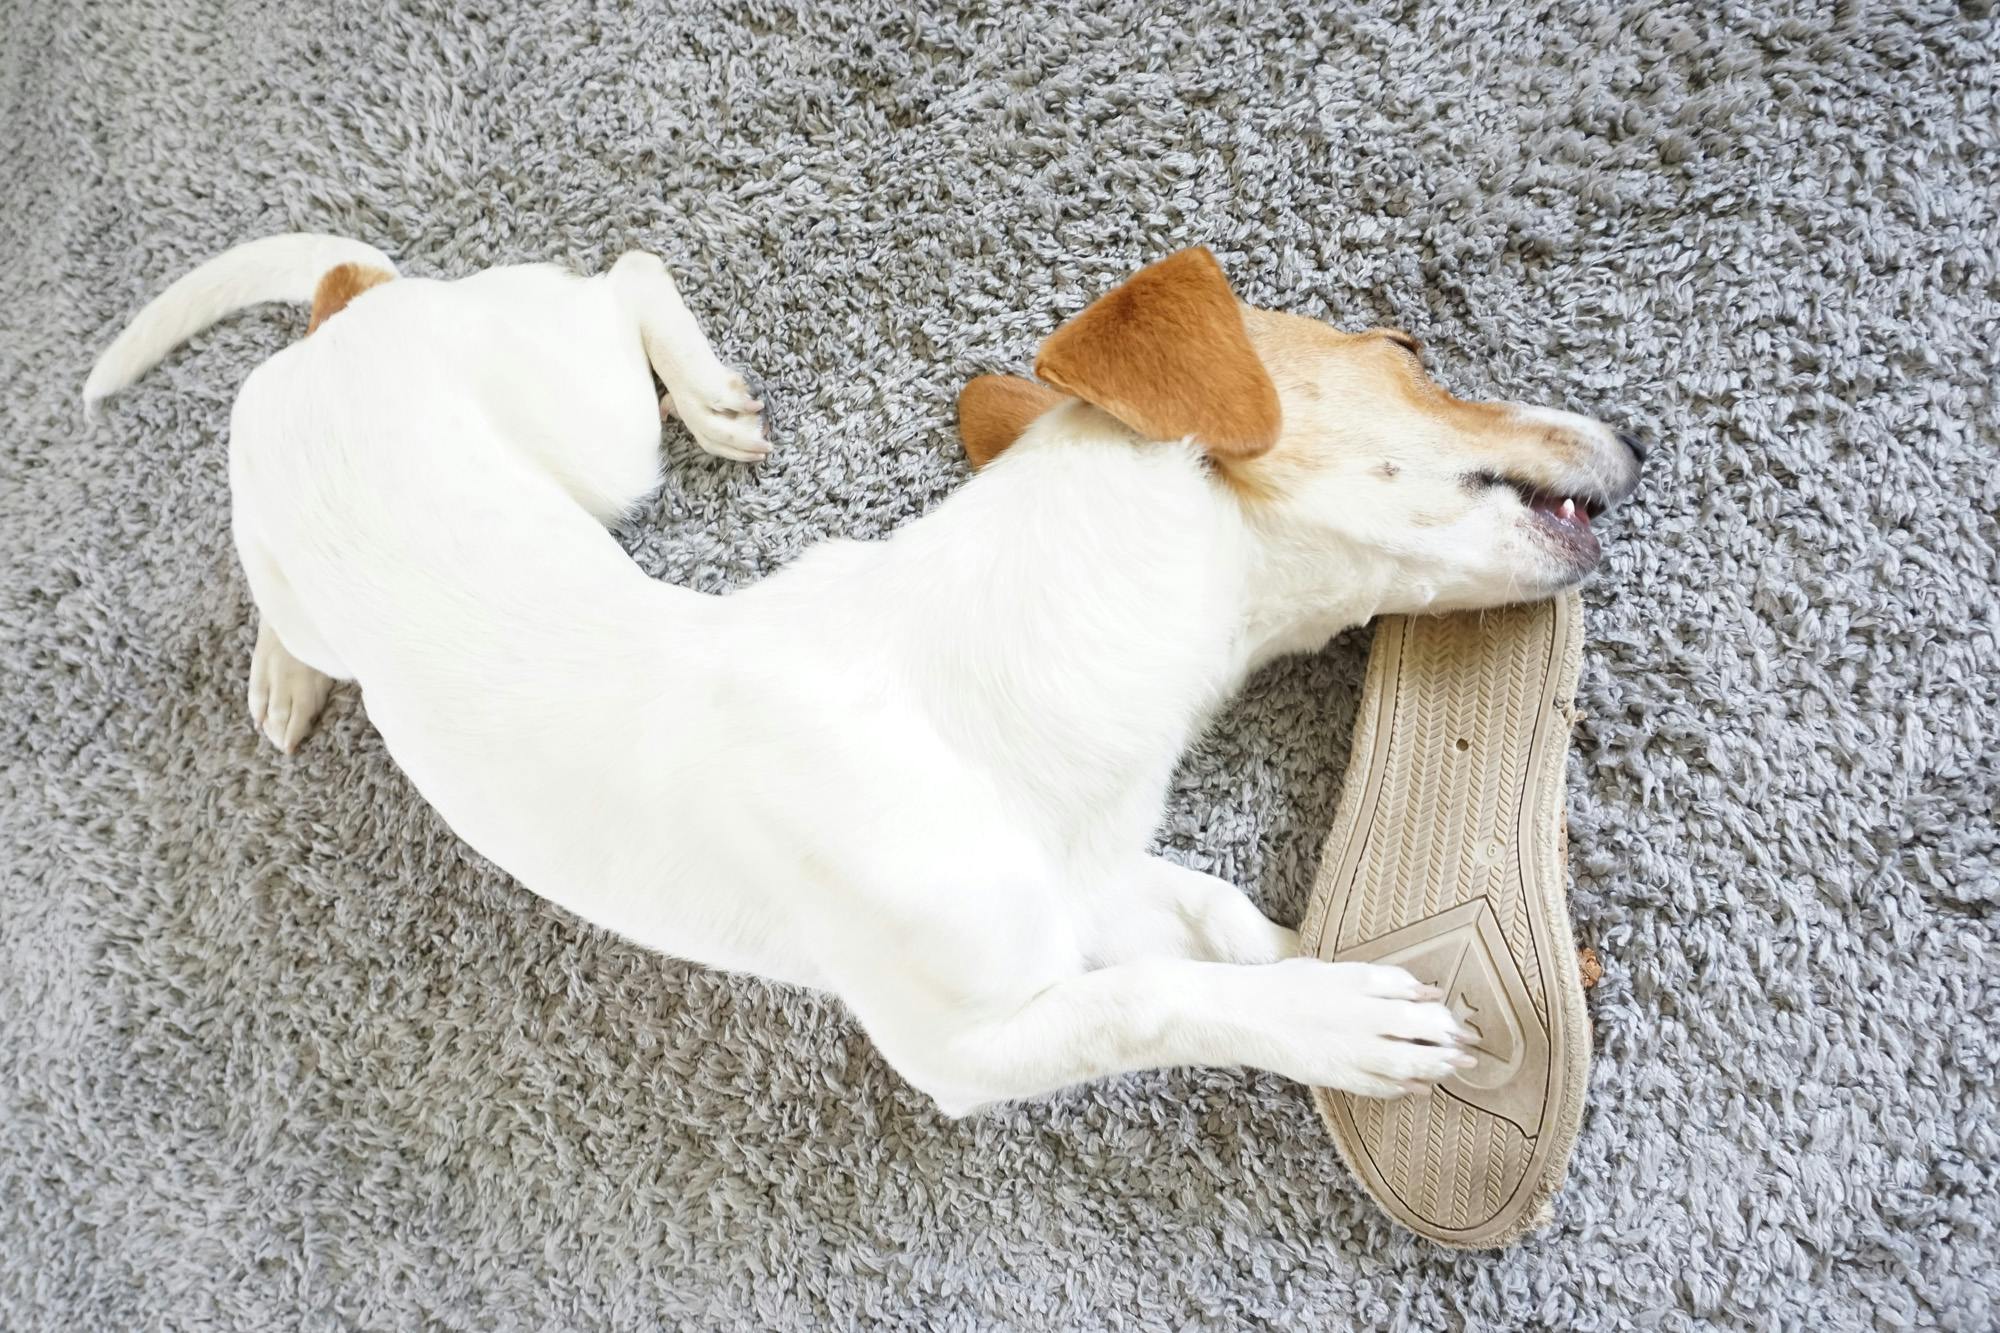 Jack Russell Terrier chewing, a fun behavior, on the wrong object, a shoe